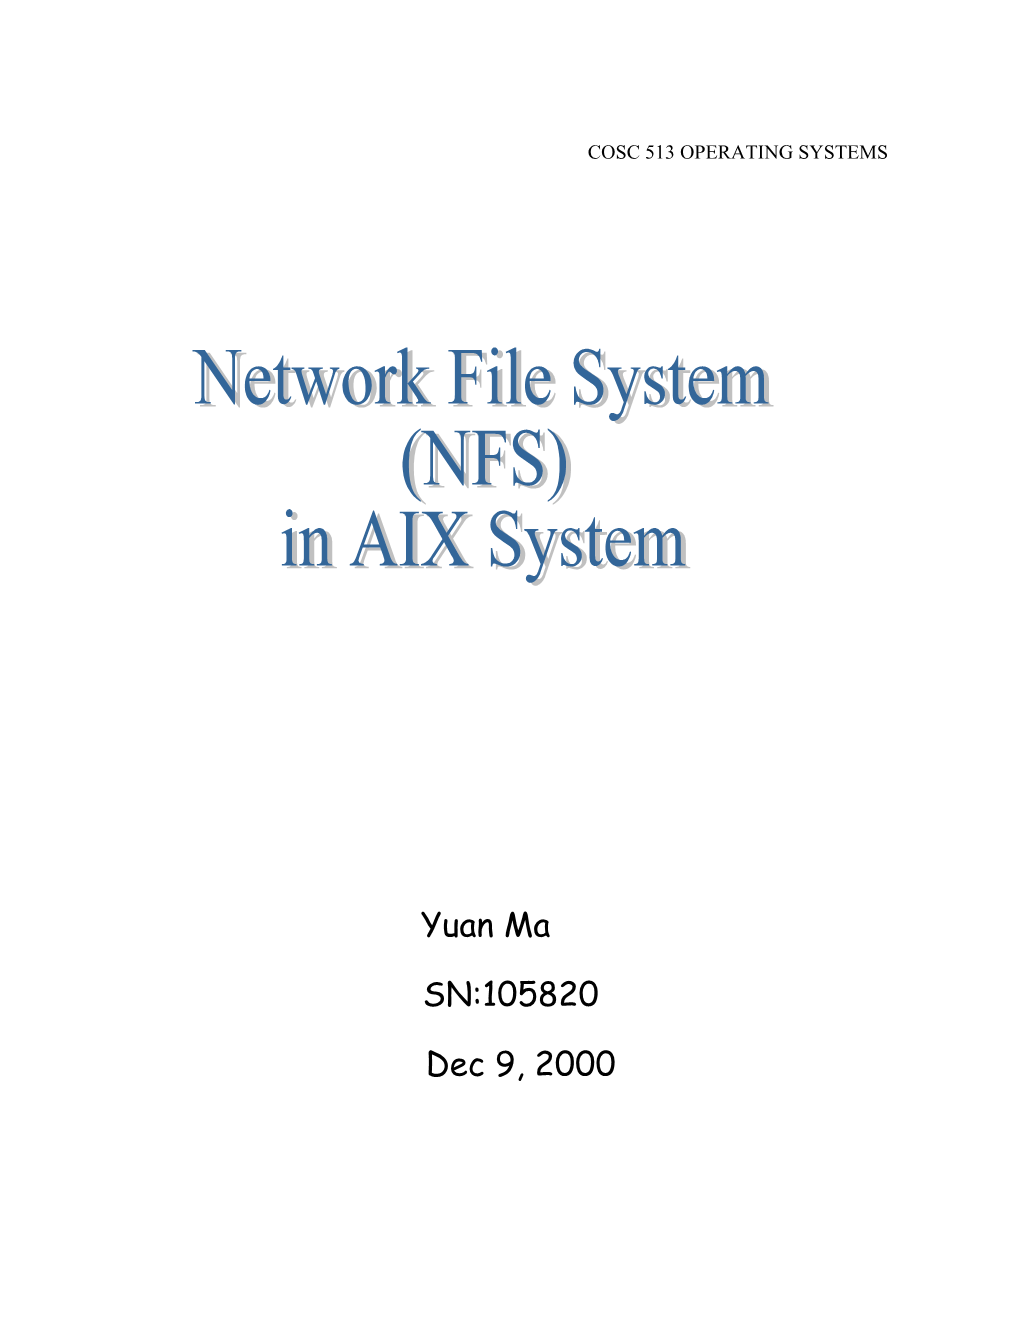 AIX Is Building Momentum As the Leading, UNIX Operating System for Enterprise Class Servers